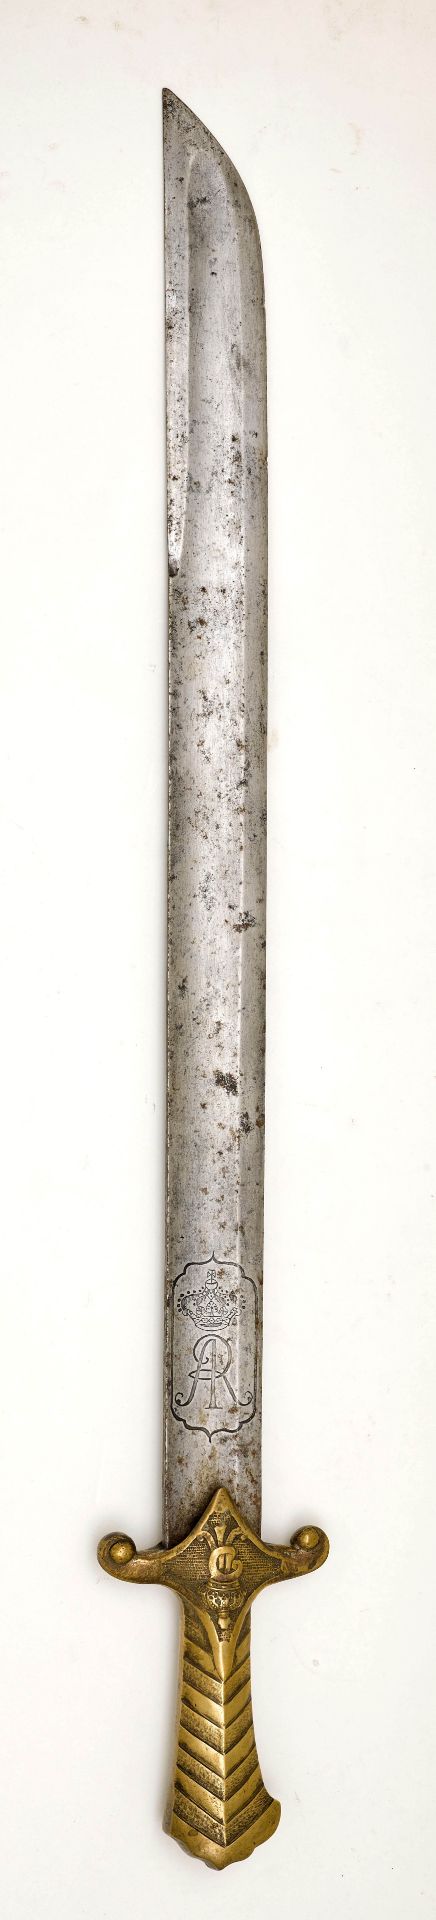 SWORD, JANISSARY CORPS - Image 2 of 2